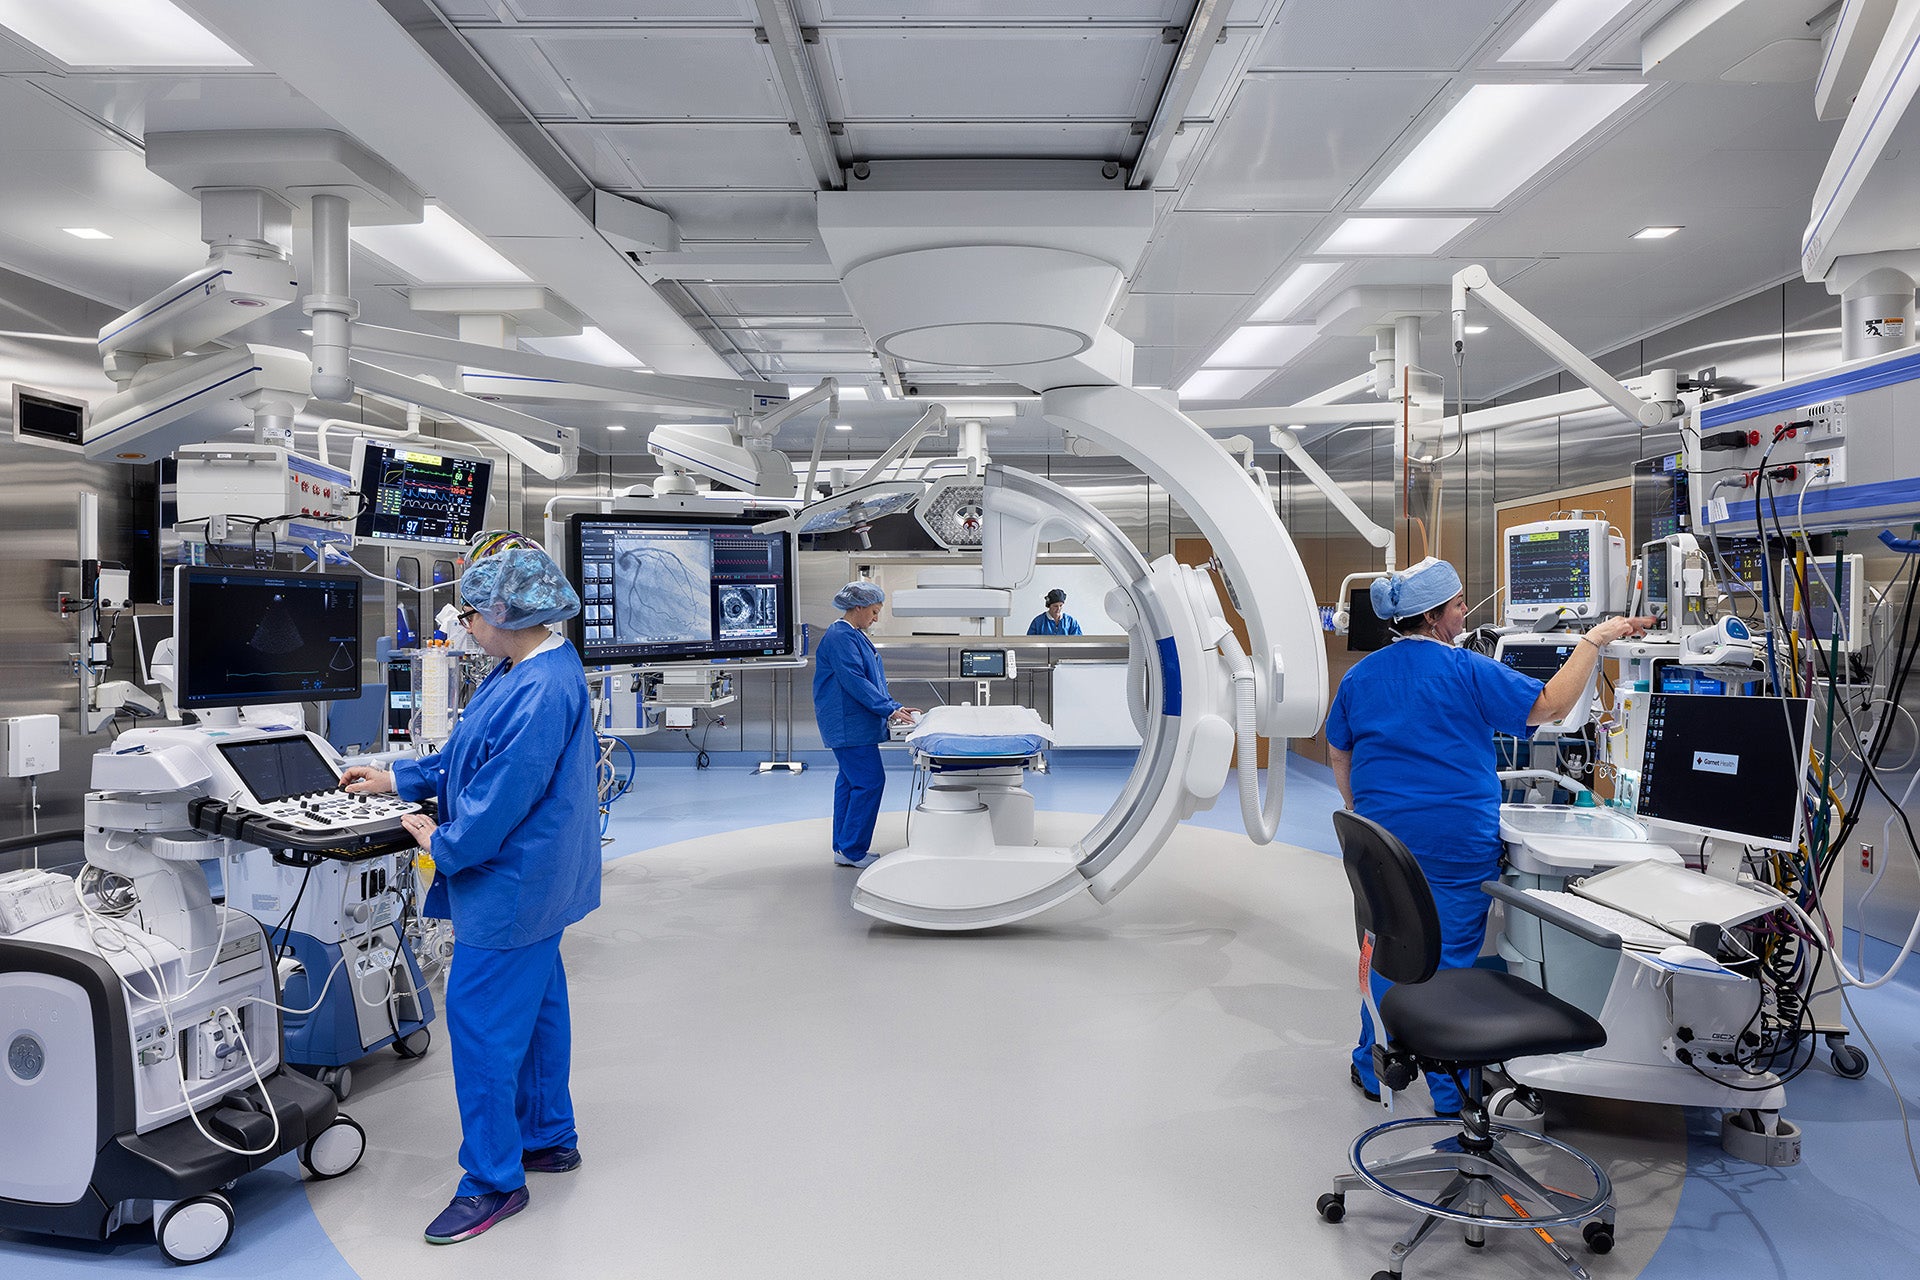 "New Hybrid Operating Room at GHMC"